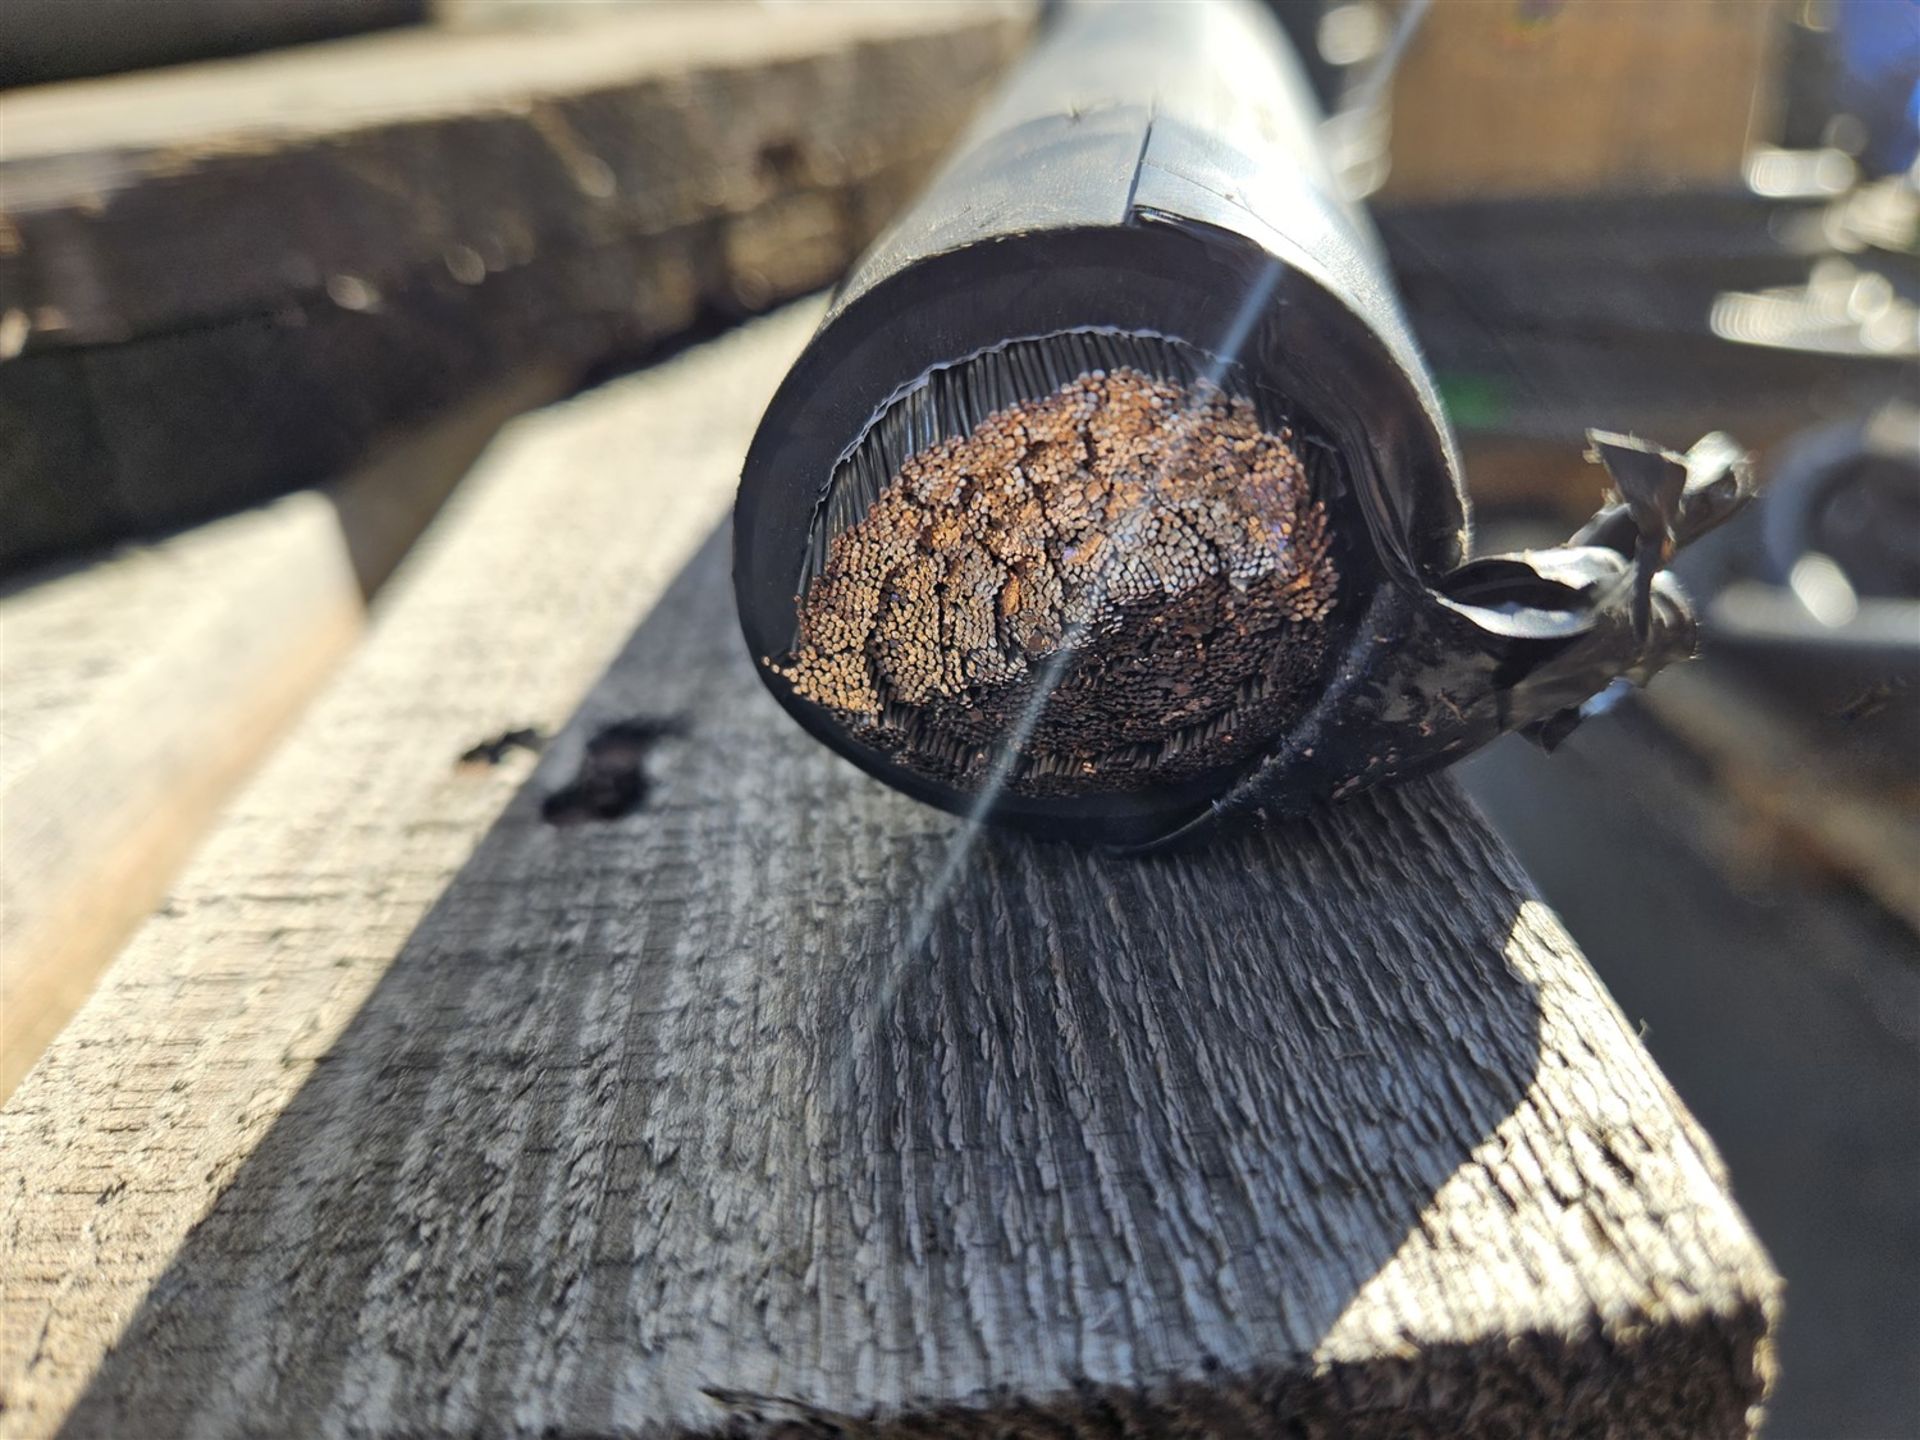 REEL OF TF CABLE 923 MCM APPROX. 130 FT. - COPPER - Image 2 of 5